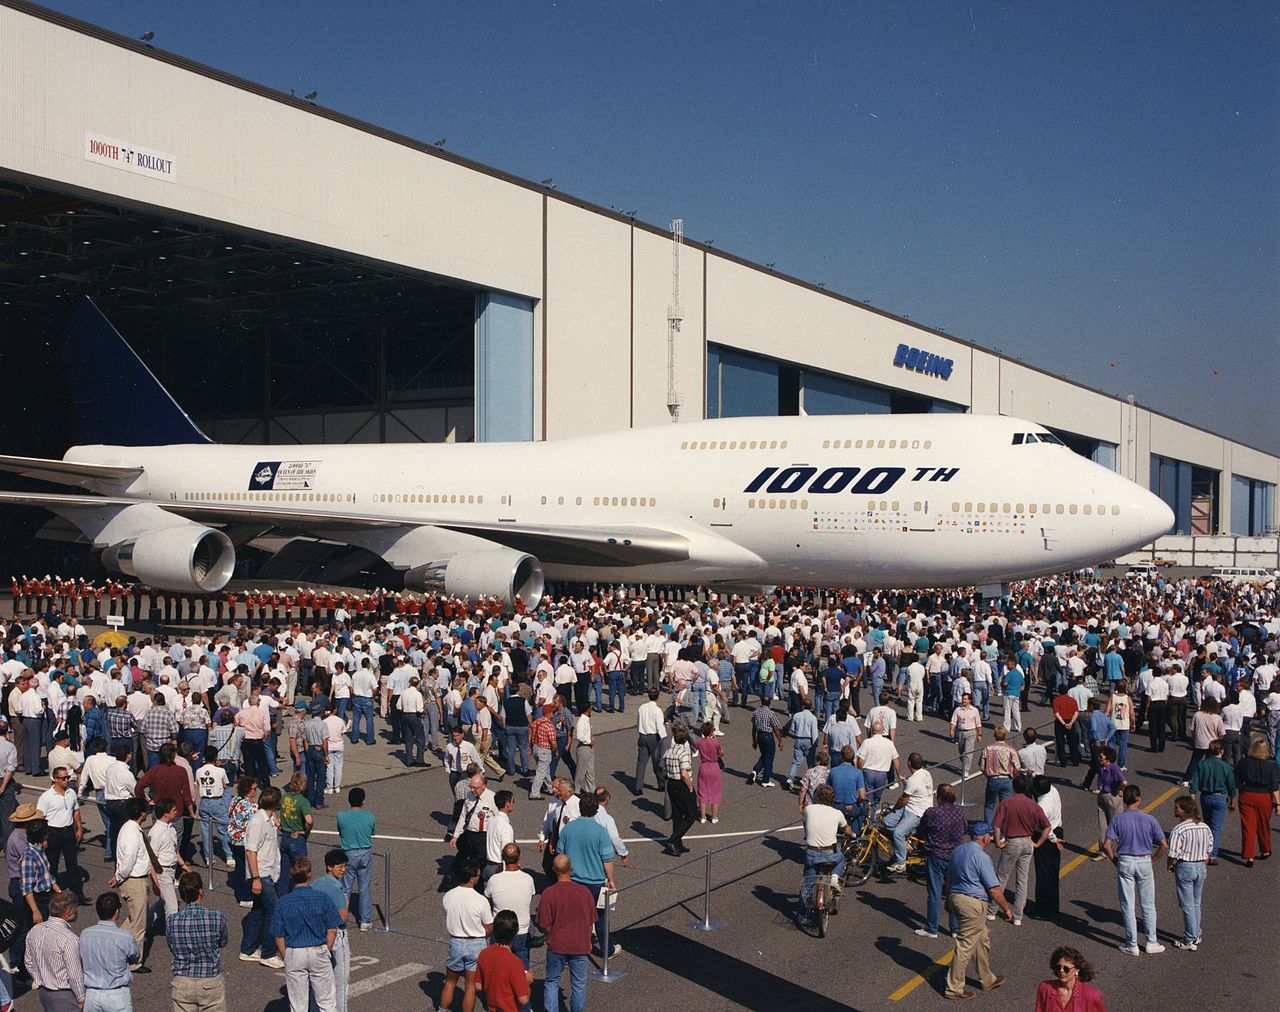 The 1,000th Boeing 747-400 is rolled out. (Wikipedia)